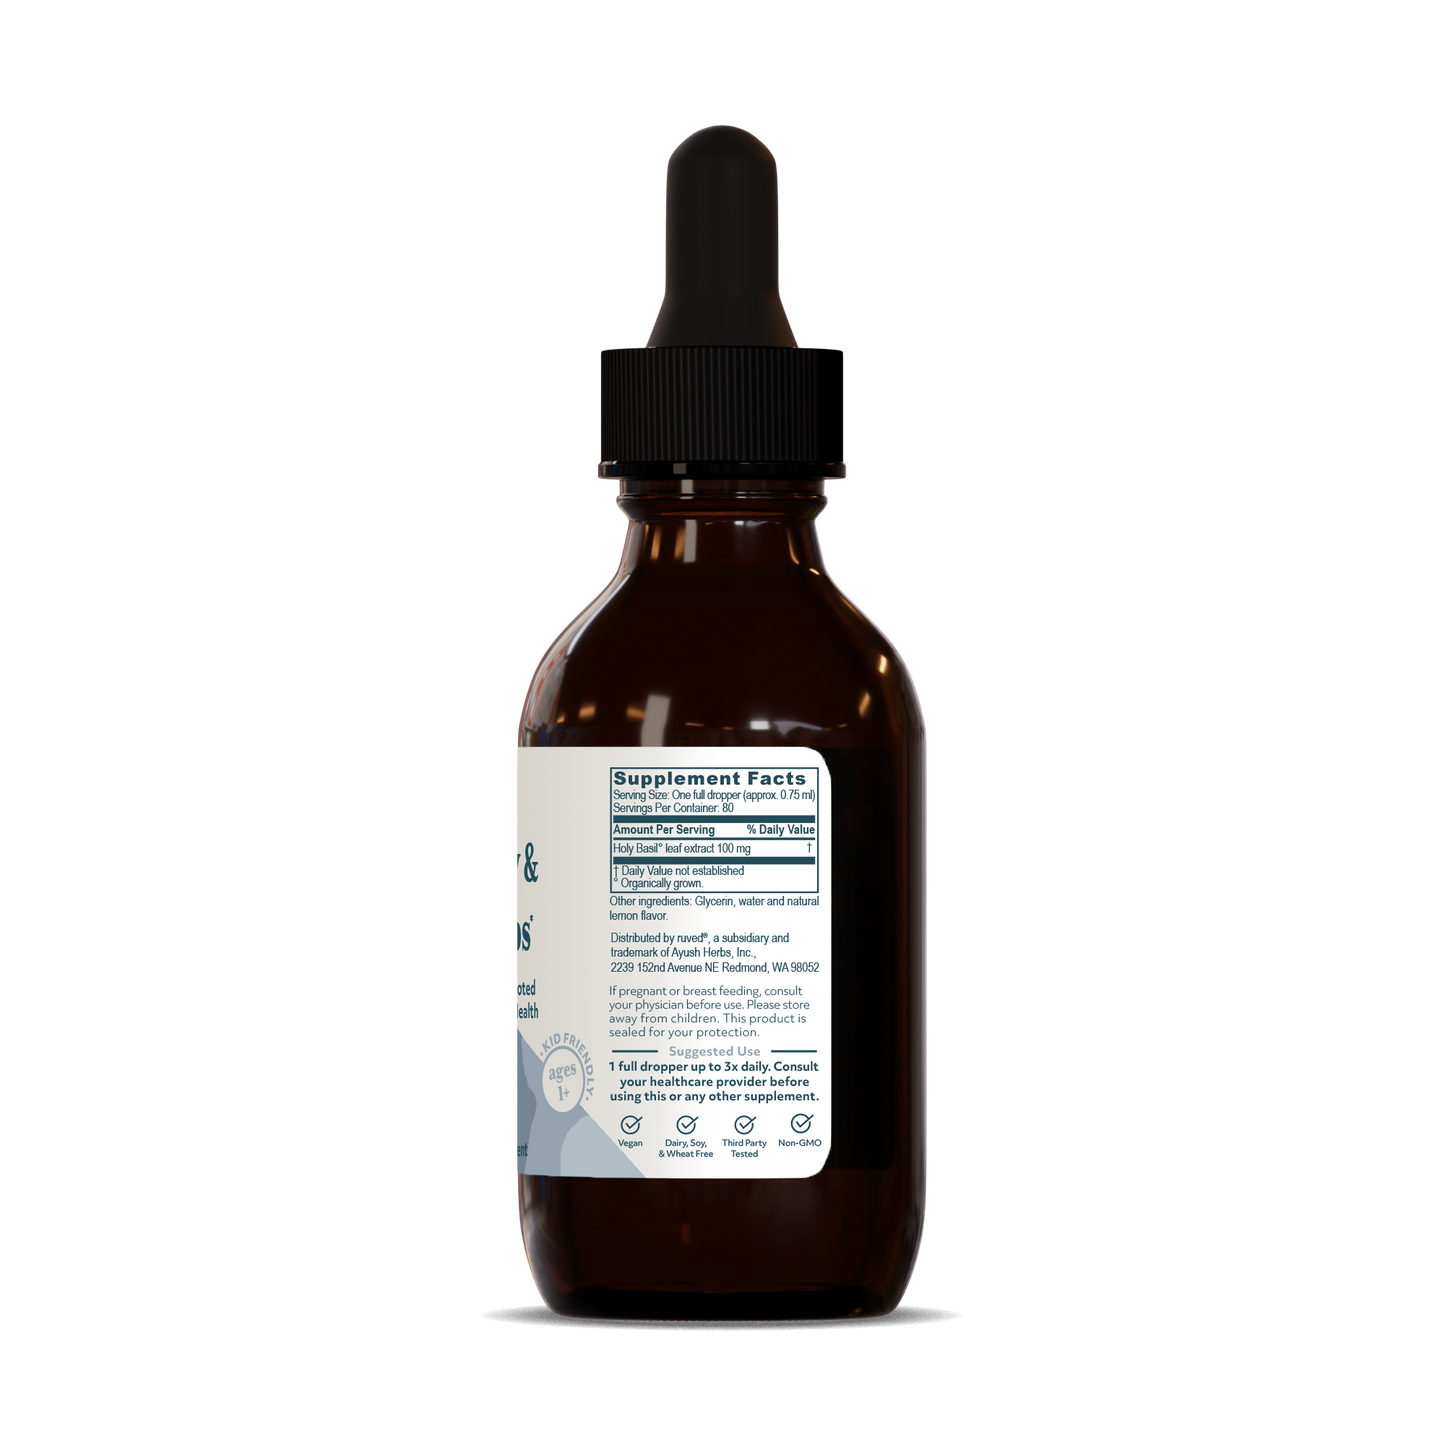 Tulsi drops Supplement Facts Side - Organic Holy Basil Extract Tincture, 60ml bottle, herbal remedy for stress relief and immune support.